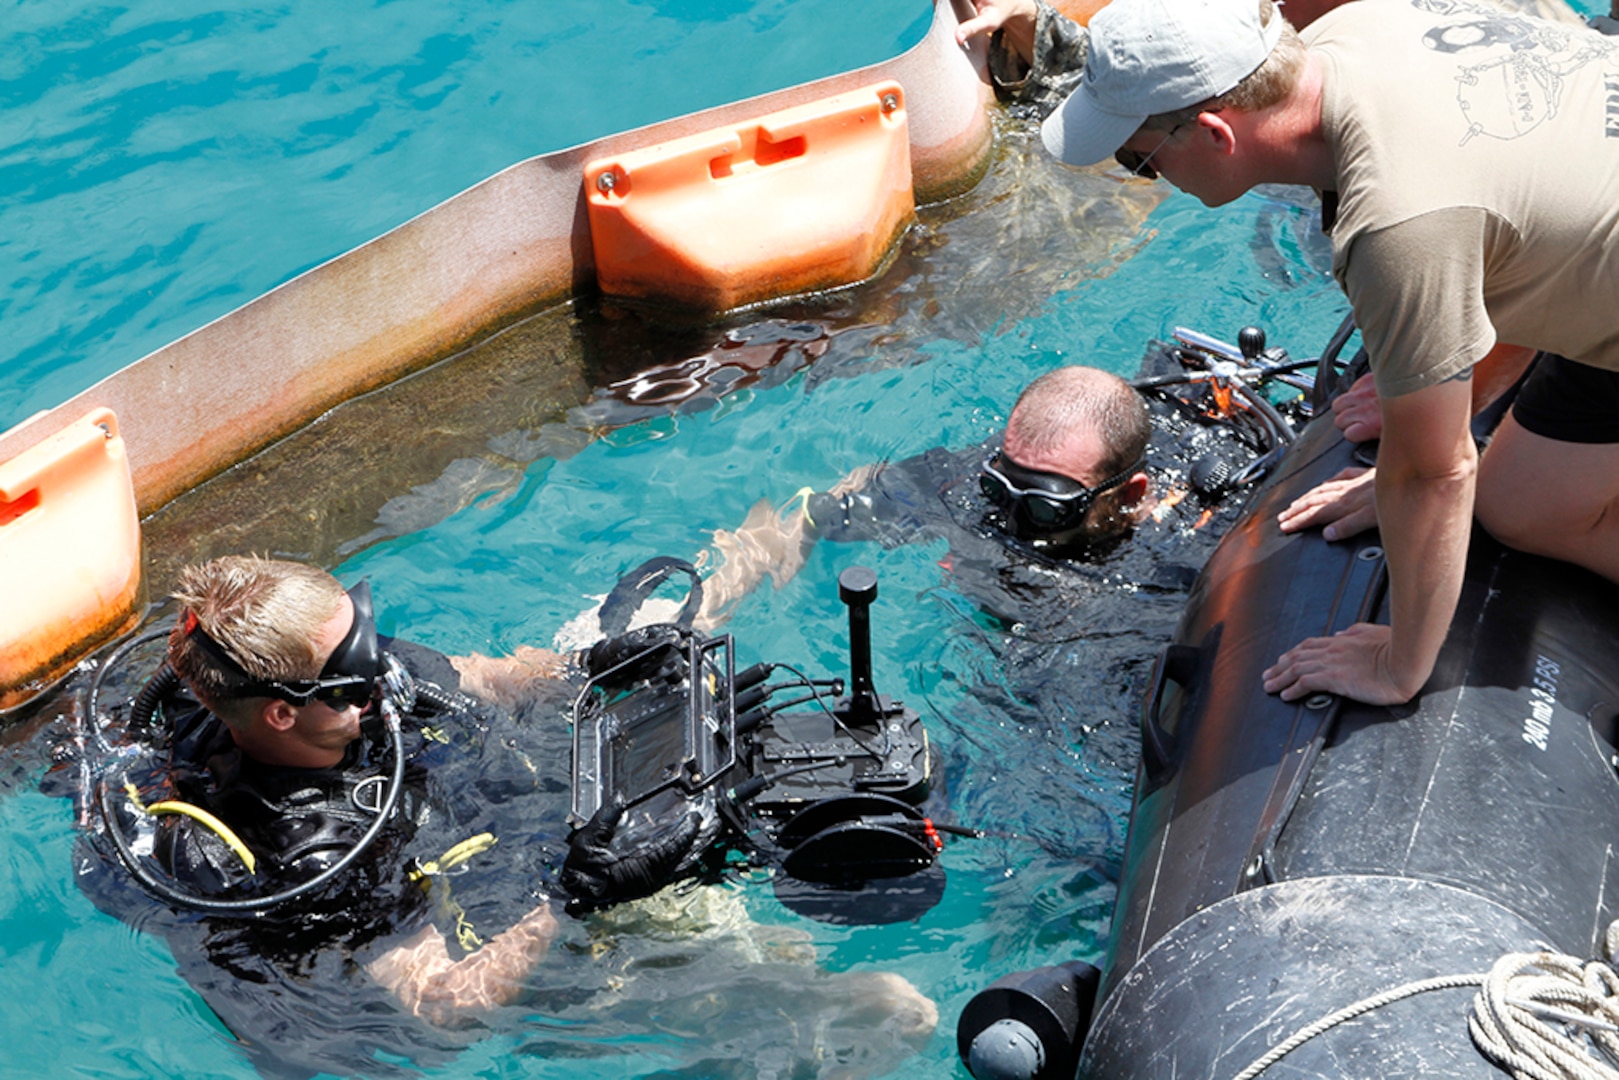 (July 20, 2016) -- U.S. Army divers with 7th Engineer Dive Detachment, 8th Theater Sustainment Command, train with Canadian Pacific Dive Team in using side scan sonar system July 20 during Rim of the Pacific 2016 at Joint Base Pearl Harbor-Hickam, Hawaii.

